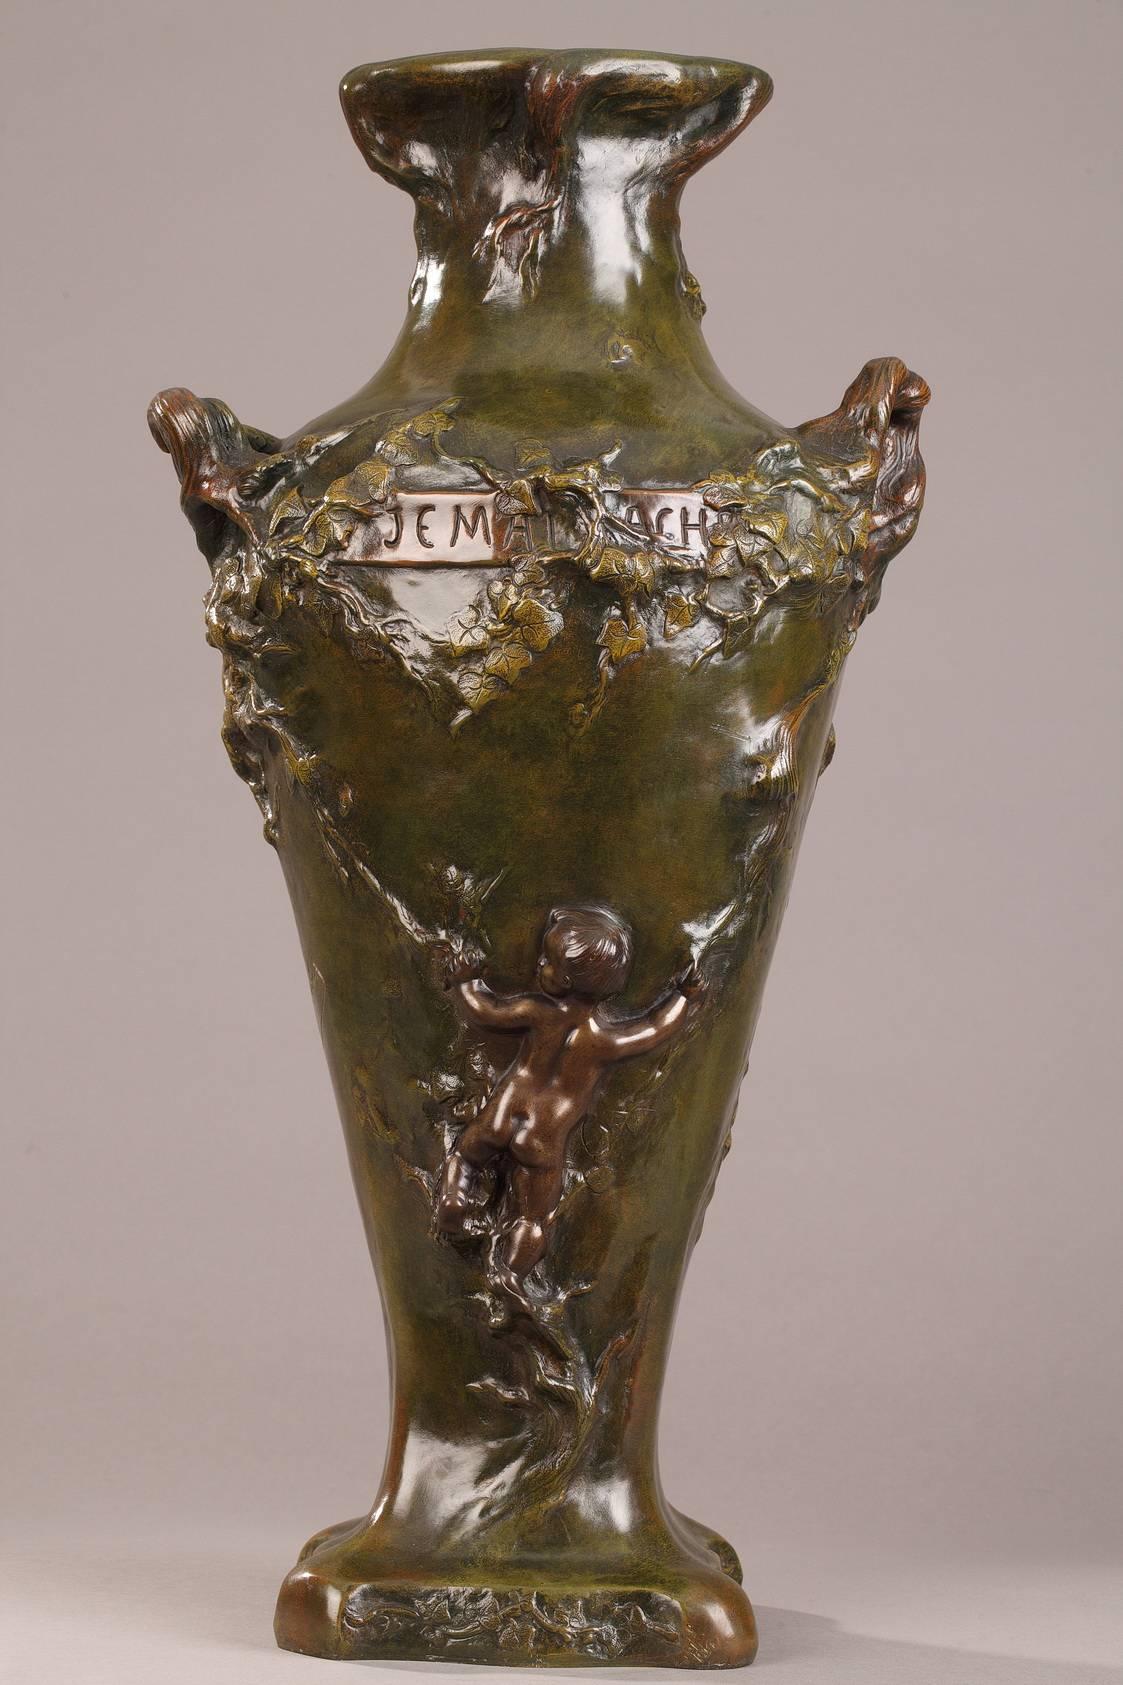 Large, bronze amphora vase with green, brown, and yellow patination. The front of the paunch is decorated with a naiad, lying on waves and surrounded by aquatic plants. On the other side of the vase, a cupid, seen from behind, is climbing the